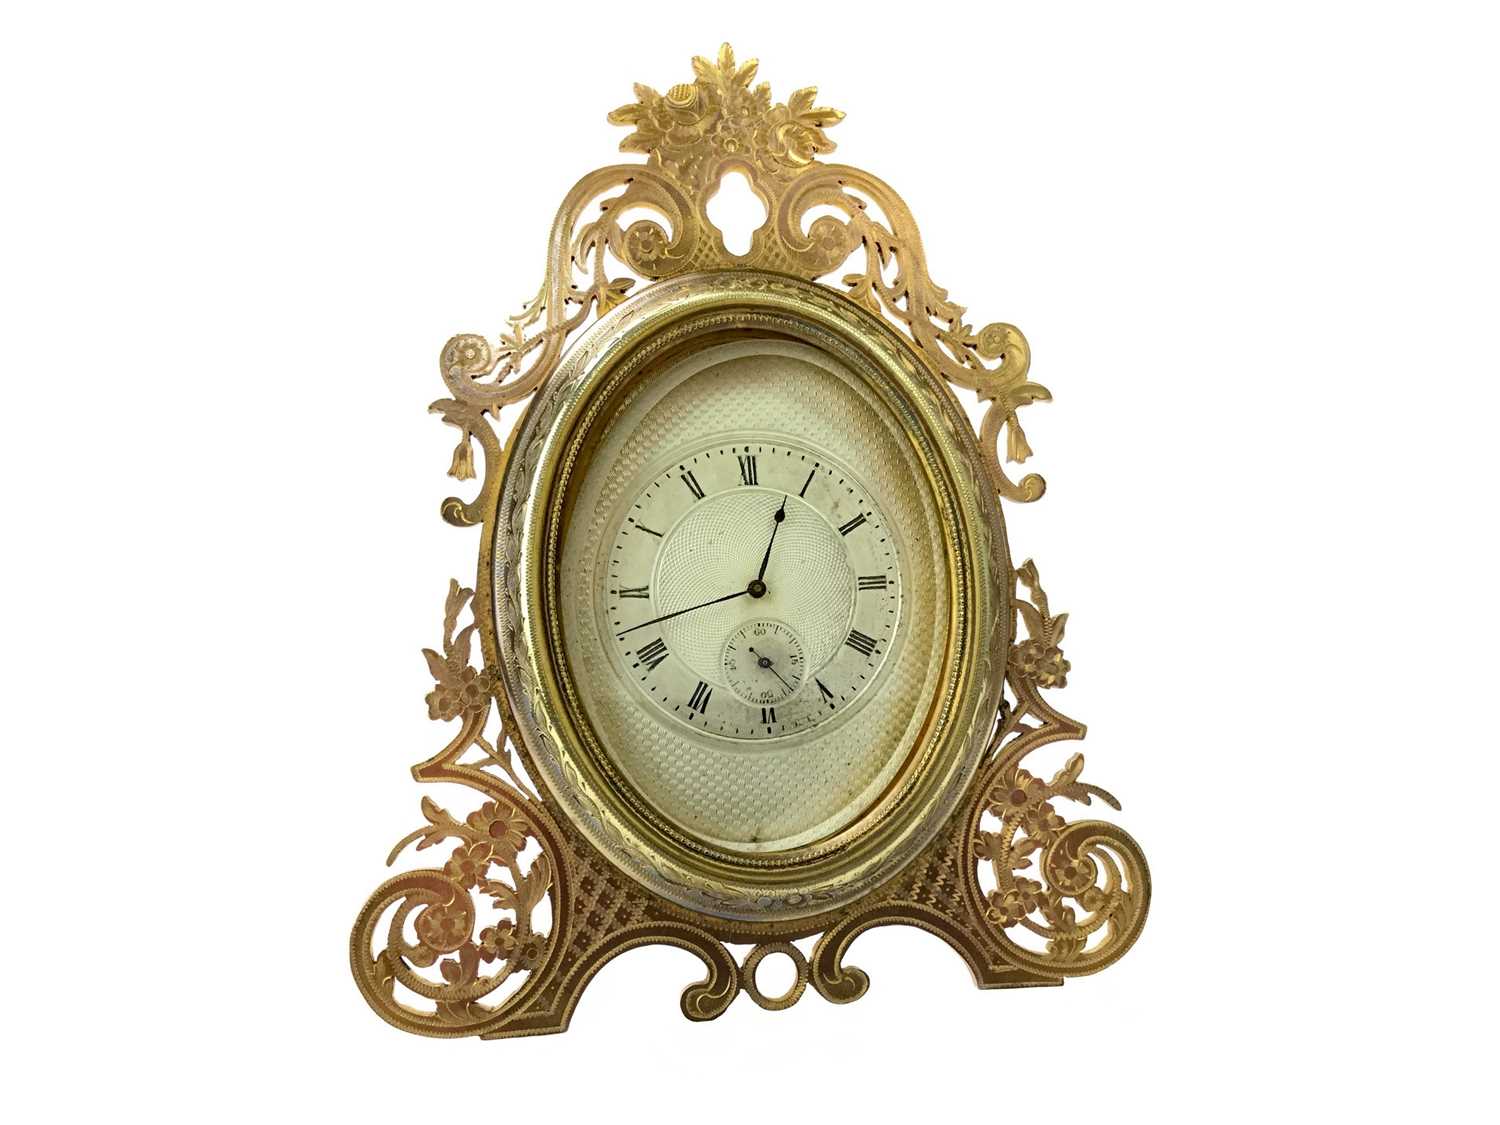 Lot 1155 - AN EARLY 20TH CENTURY STRUT CLOCK IN THE STYLE OF THOMAS COLE